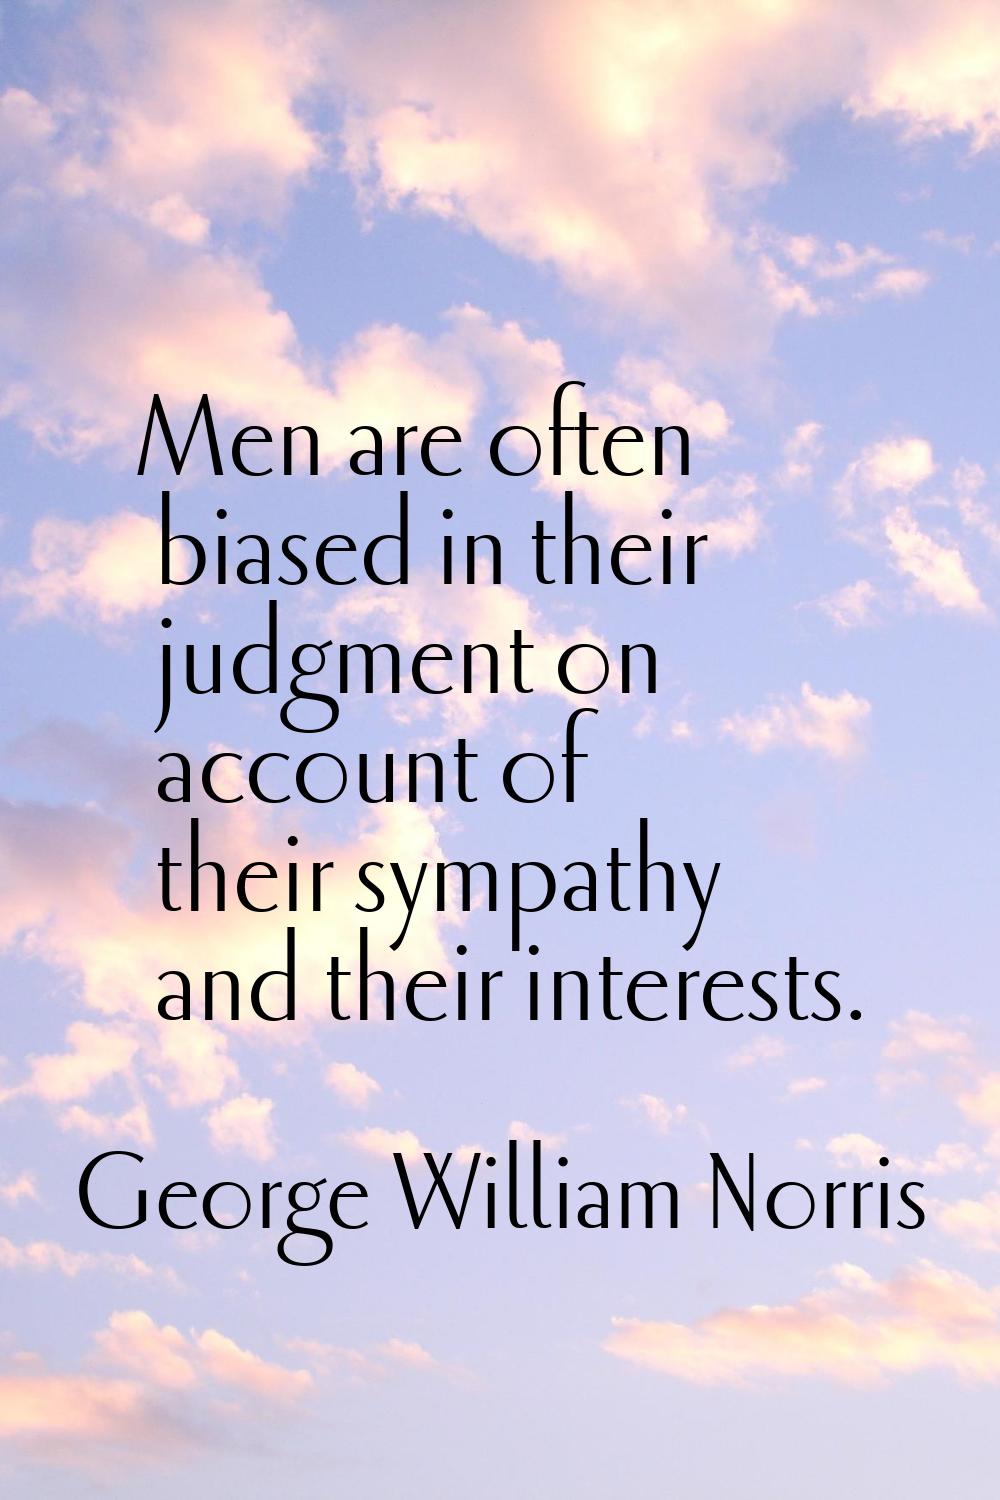 Men are often biased in their judgment on account of their sympathy and their interests.